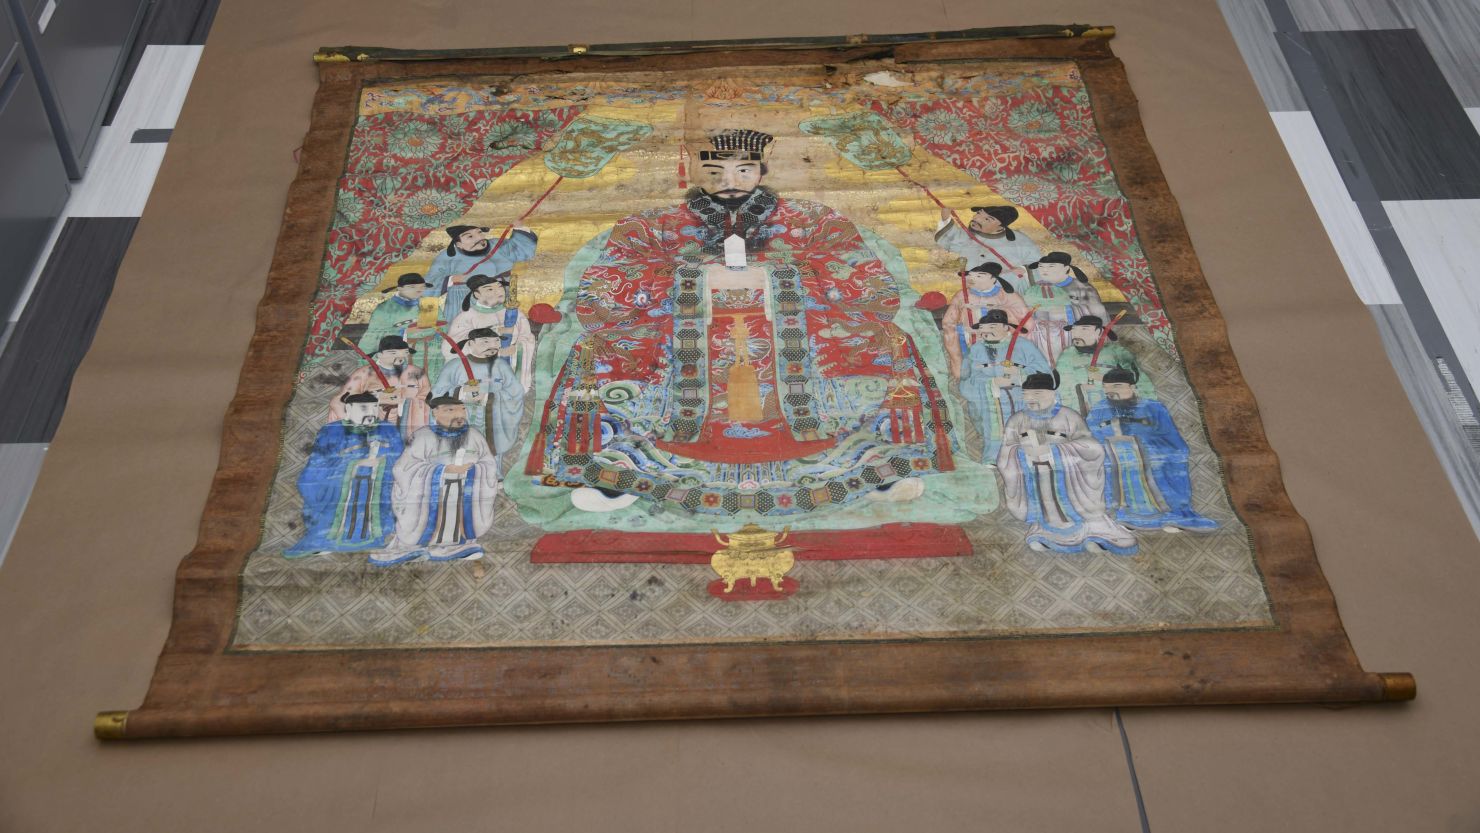 Scrolls revealed colorful portraits of Okinawan royalty.